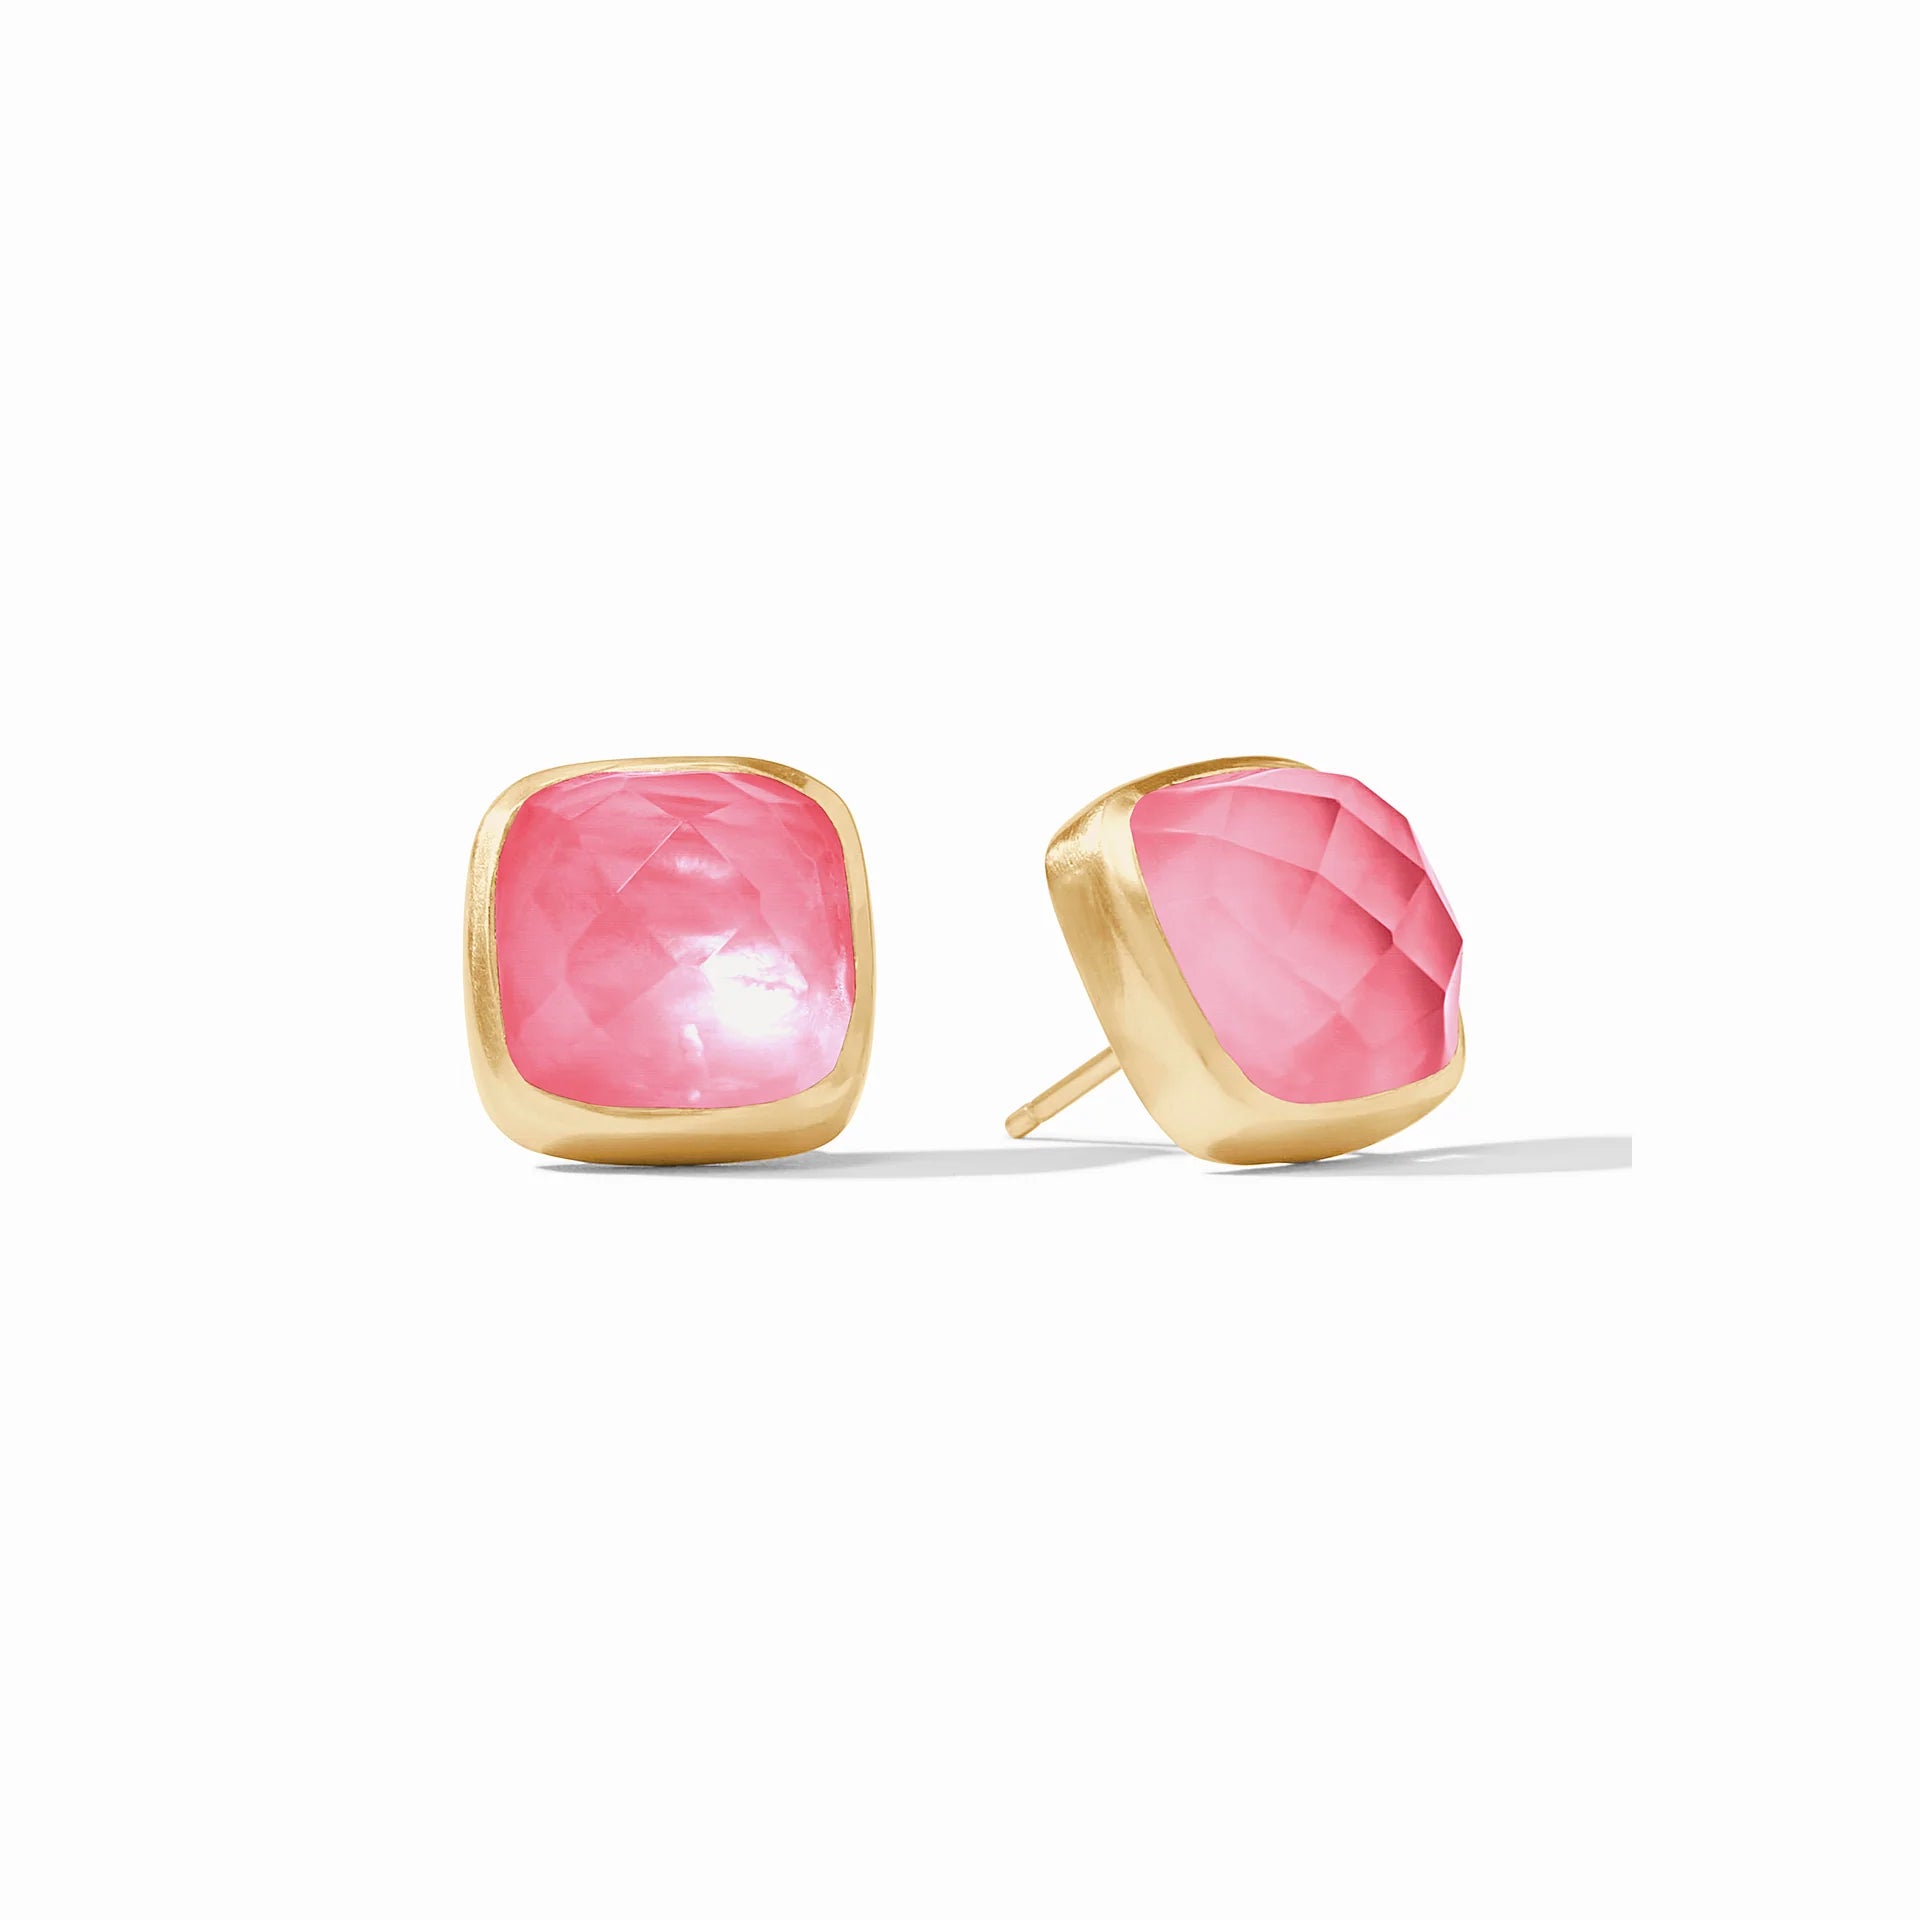 Julie Vos | Catalina Stud Earrings with Peony Pink Crystals in Gold - Giddy Up Glamour Boutique